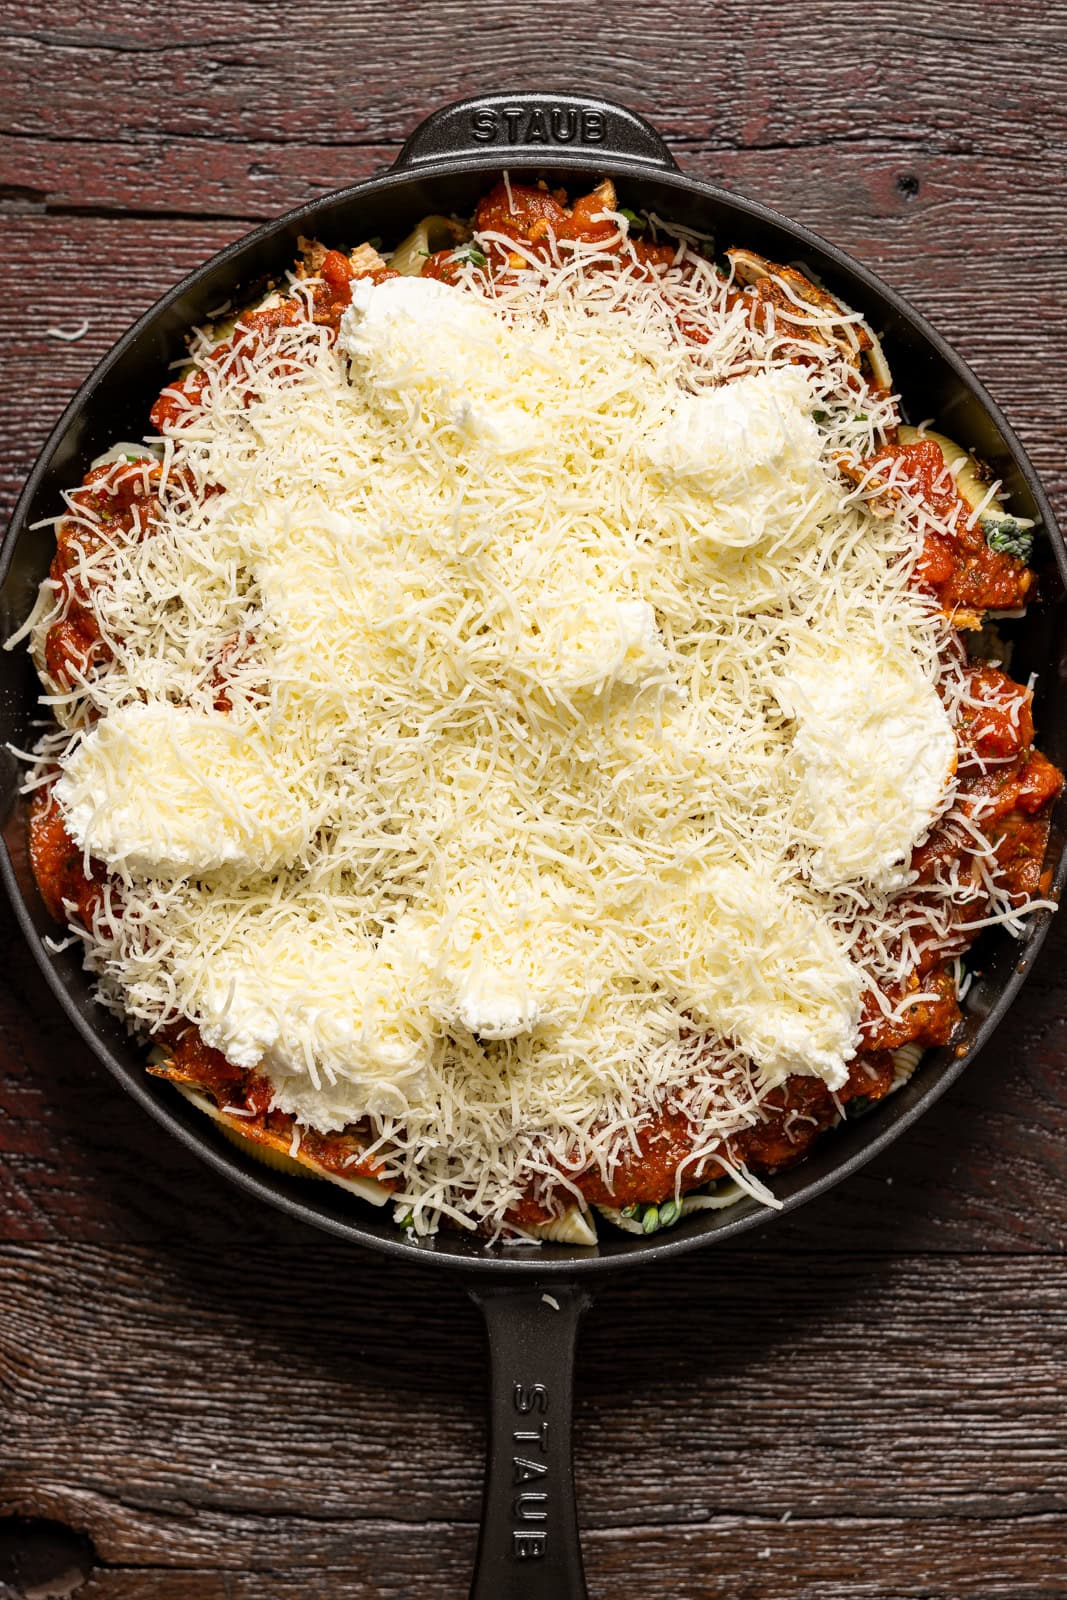 Layer of cheese atop ingredients in a skillet.